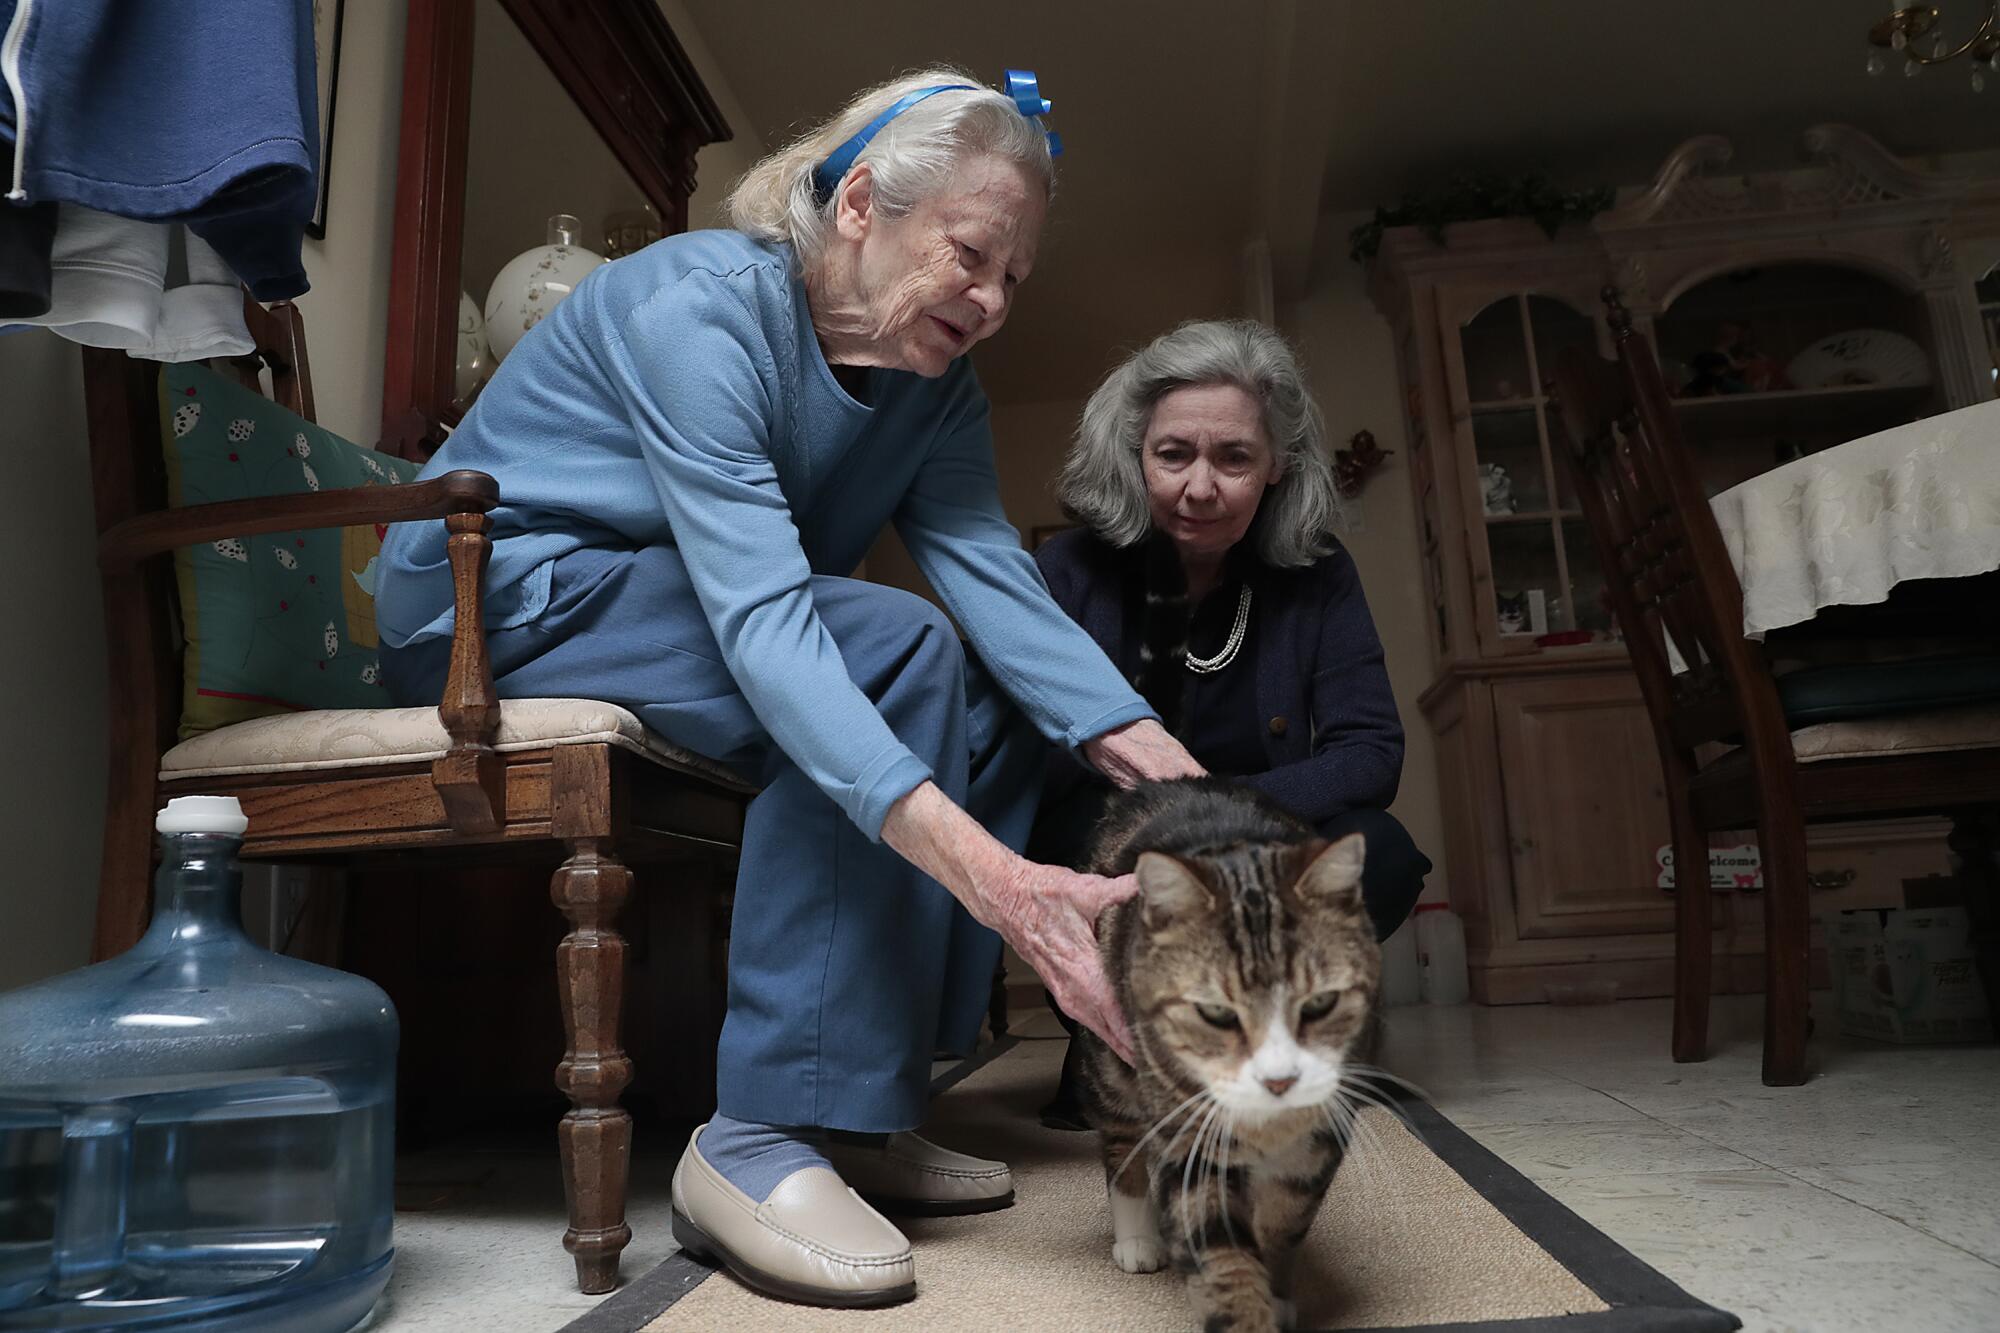 Lois Jones reaches out to her tabby cat while her daughter watches